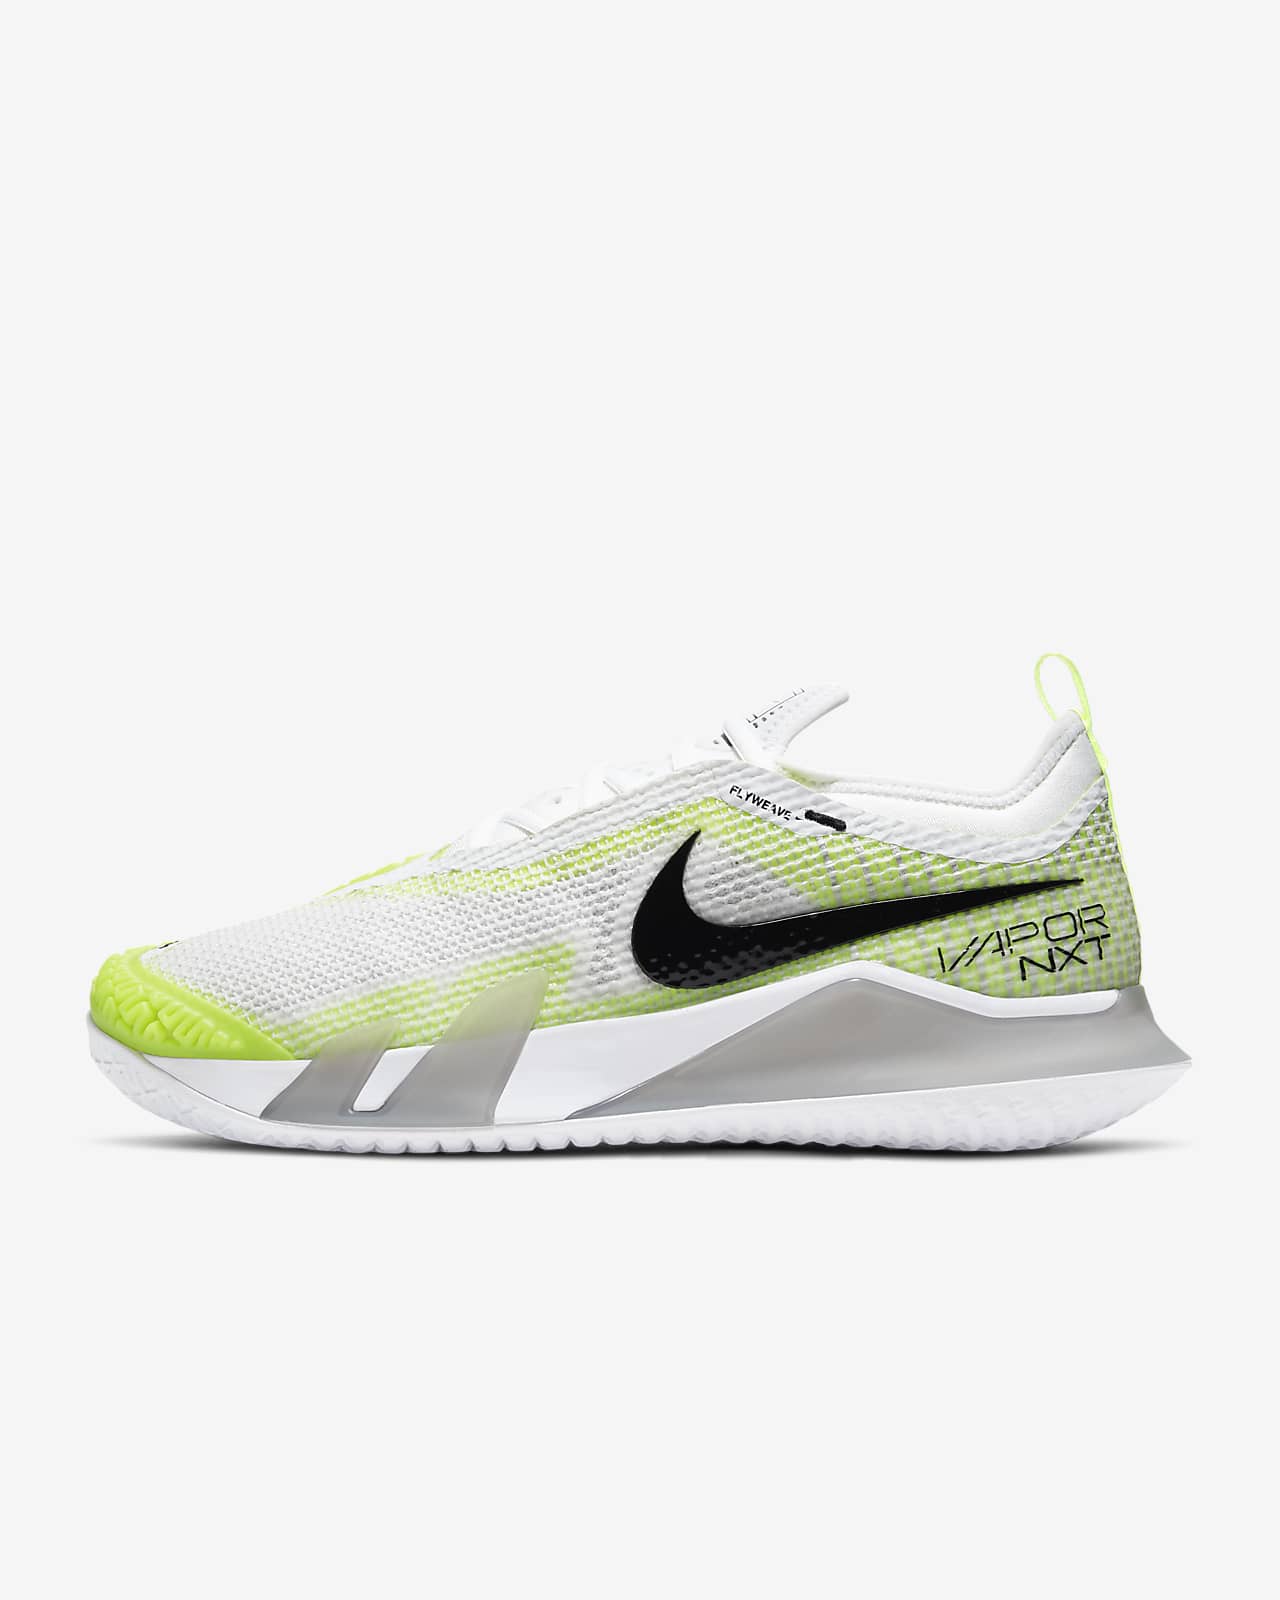 nike womens shoes for tennis